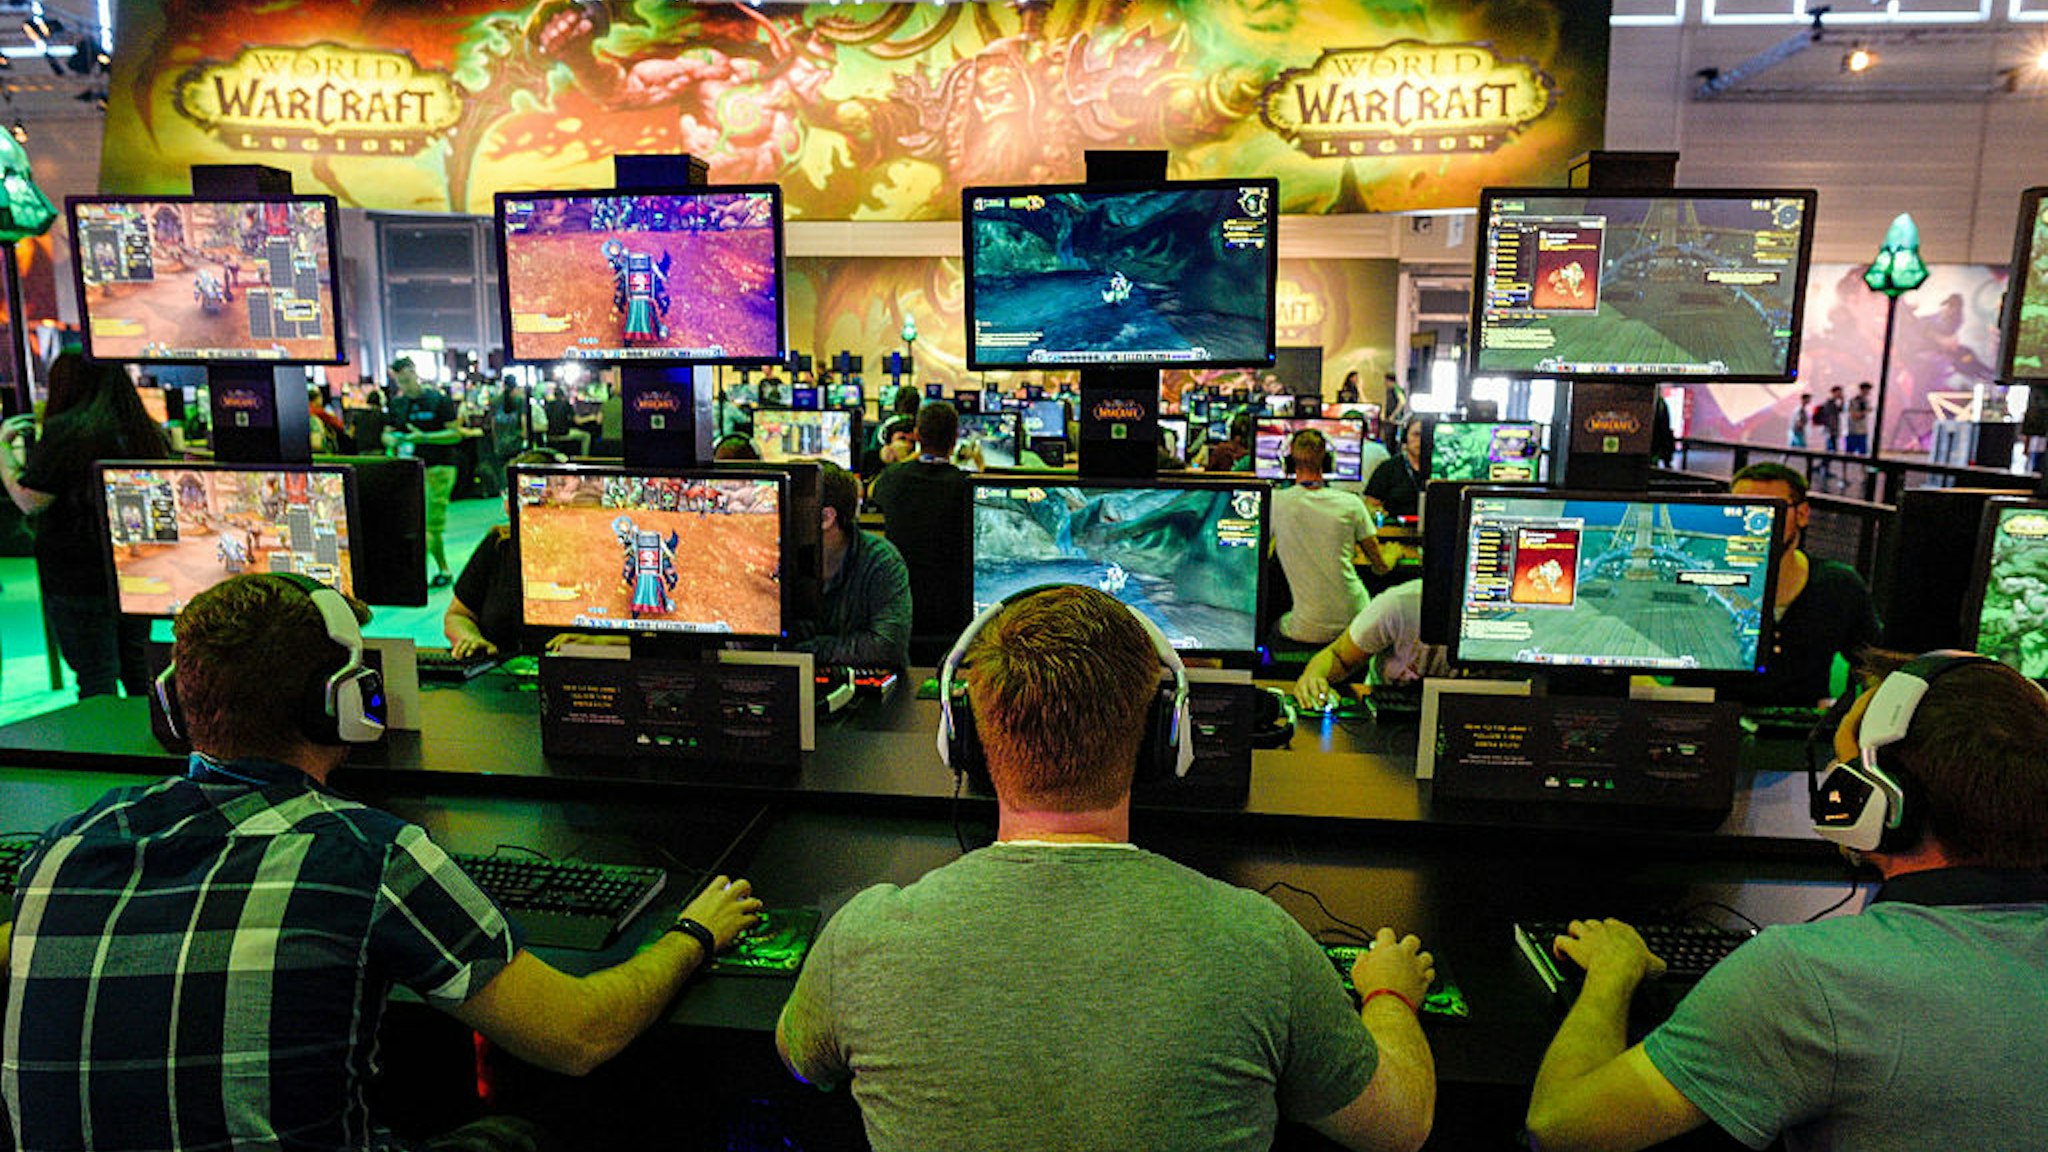 Visitors try out the massively multiplayer online role-playing game 'World Of Warcraft' at the Blizzard Entertainment stand at the Gamescom 2016 gaming trade fair during the media day on August 17, 2016 in Cologne, Germany.